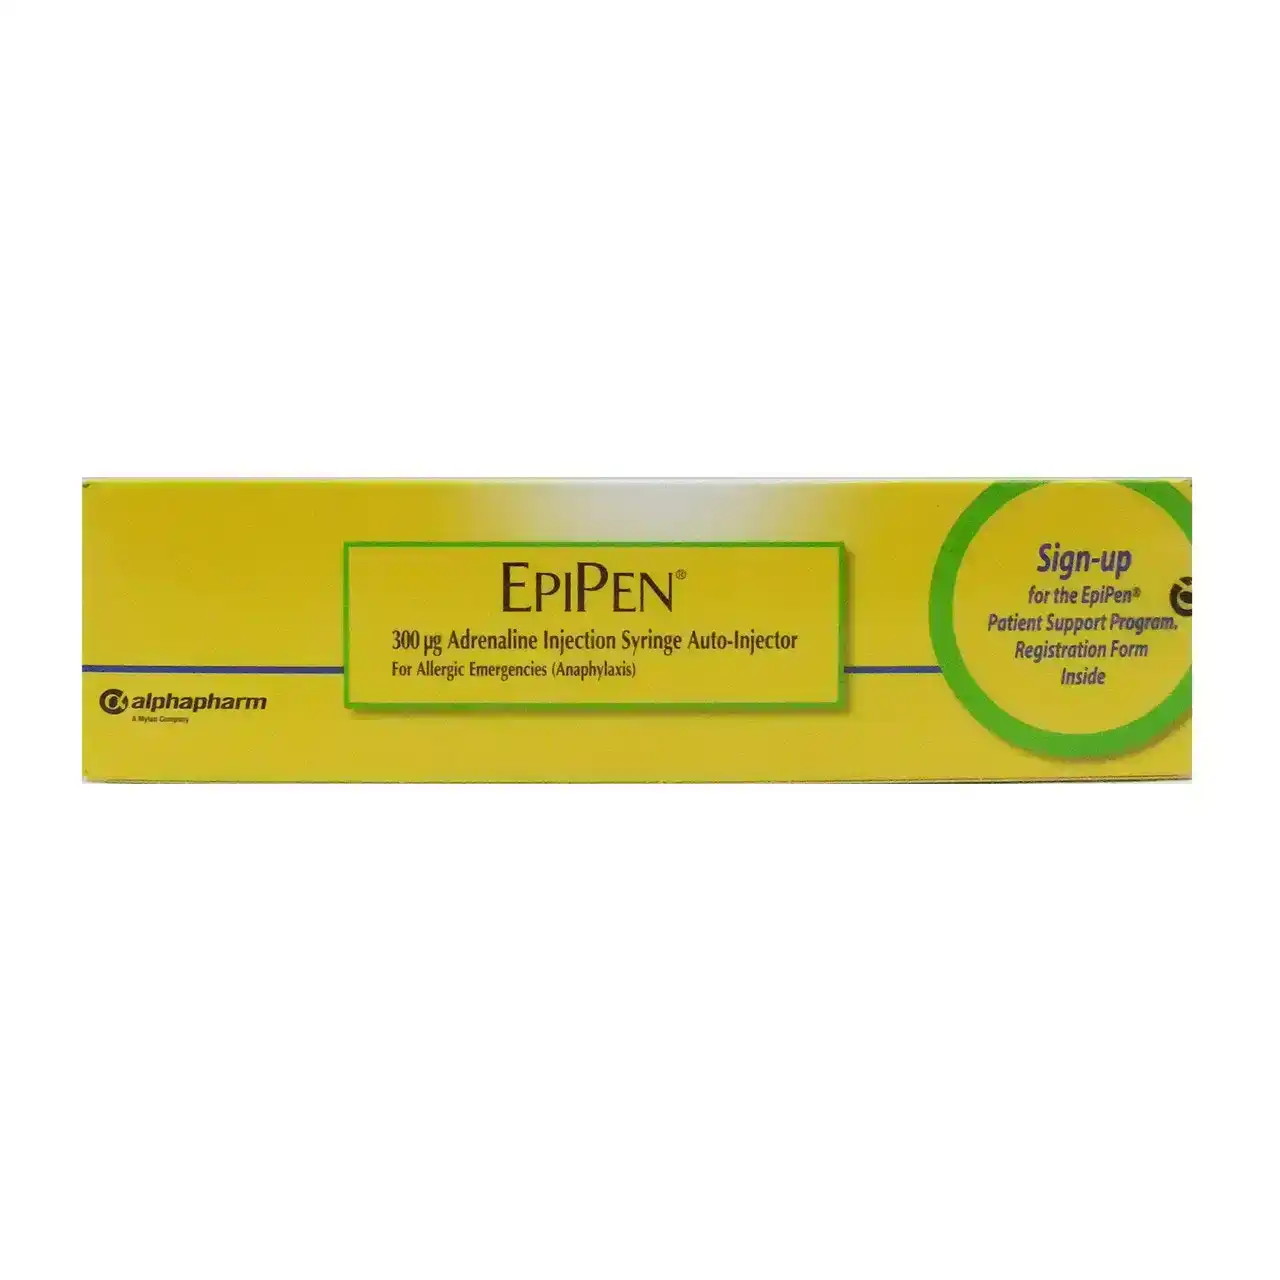 Epipen 300mg Adrenaline Injection Syringe Auto-Injector